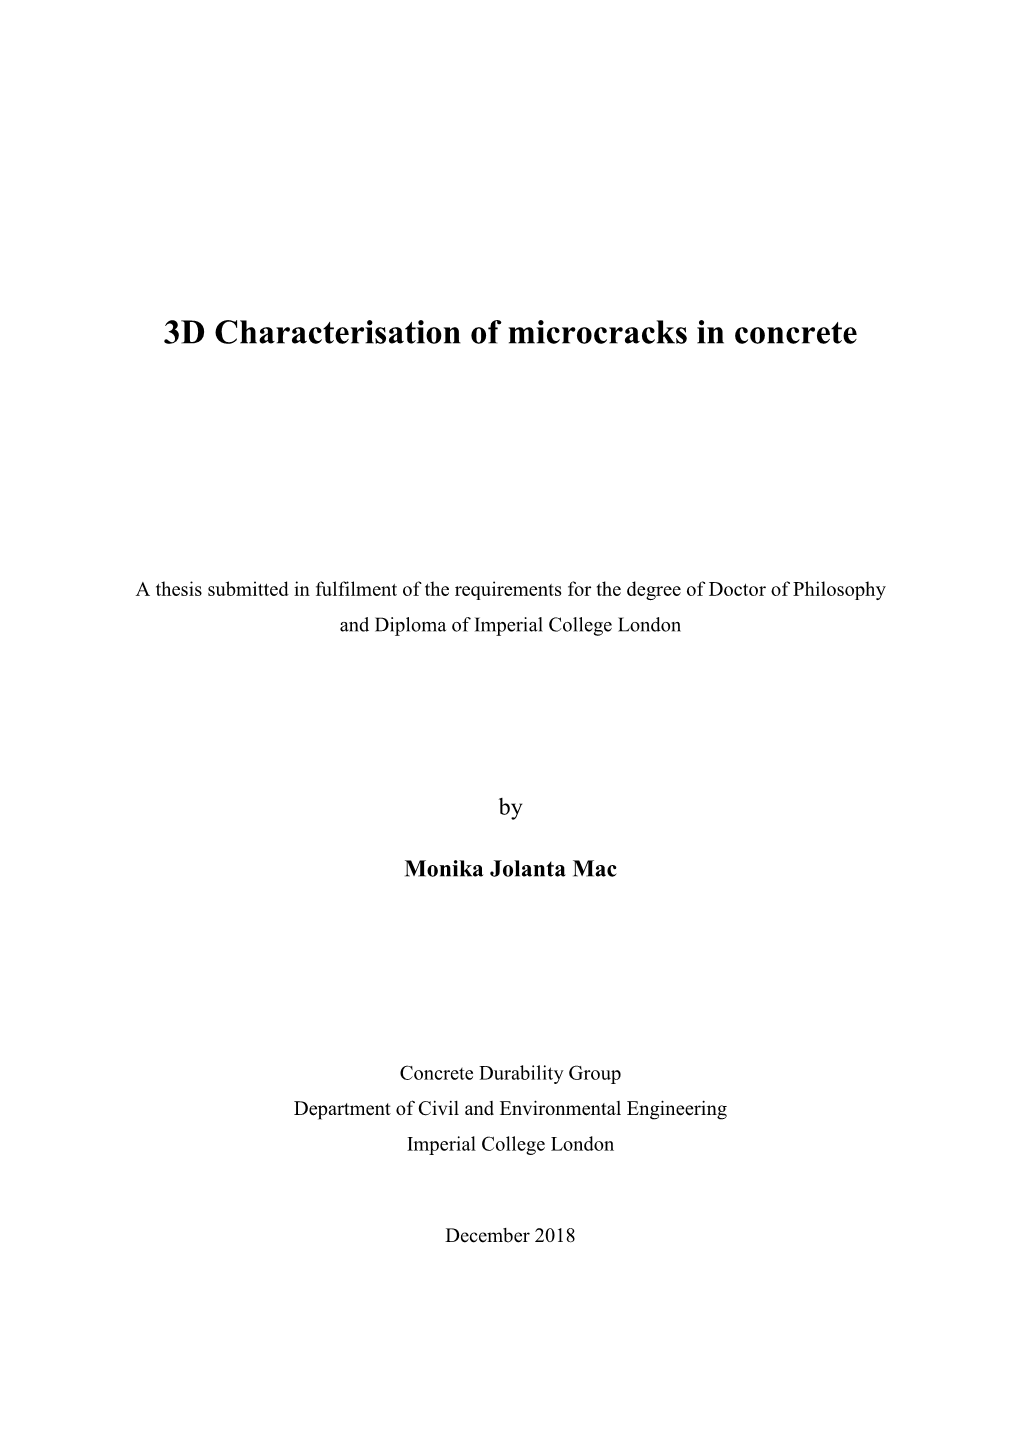 3D Characterisation of Microcracks in Concrete